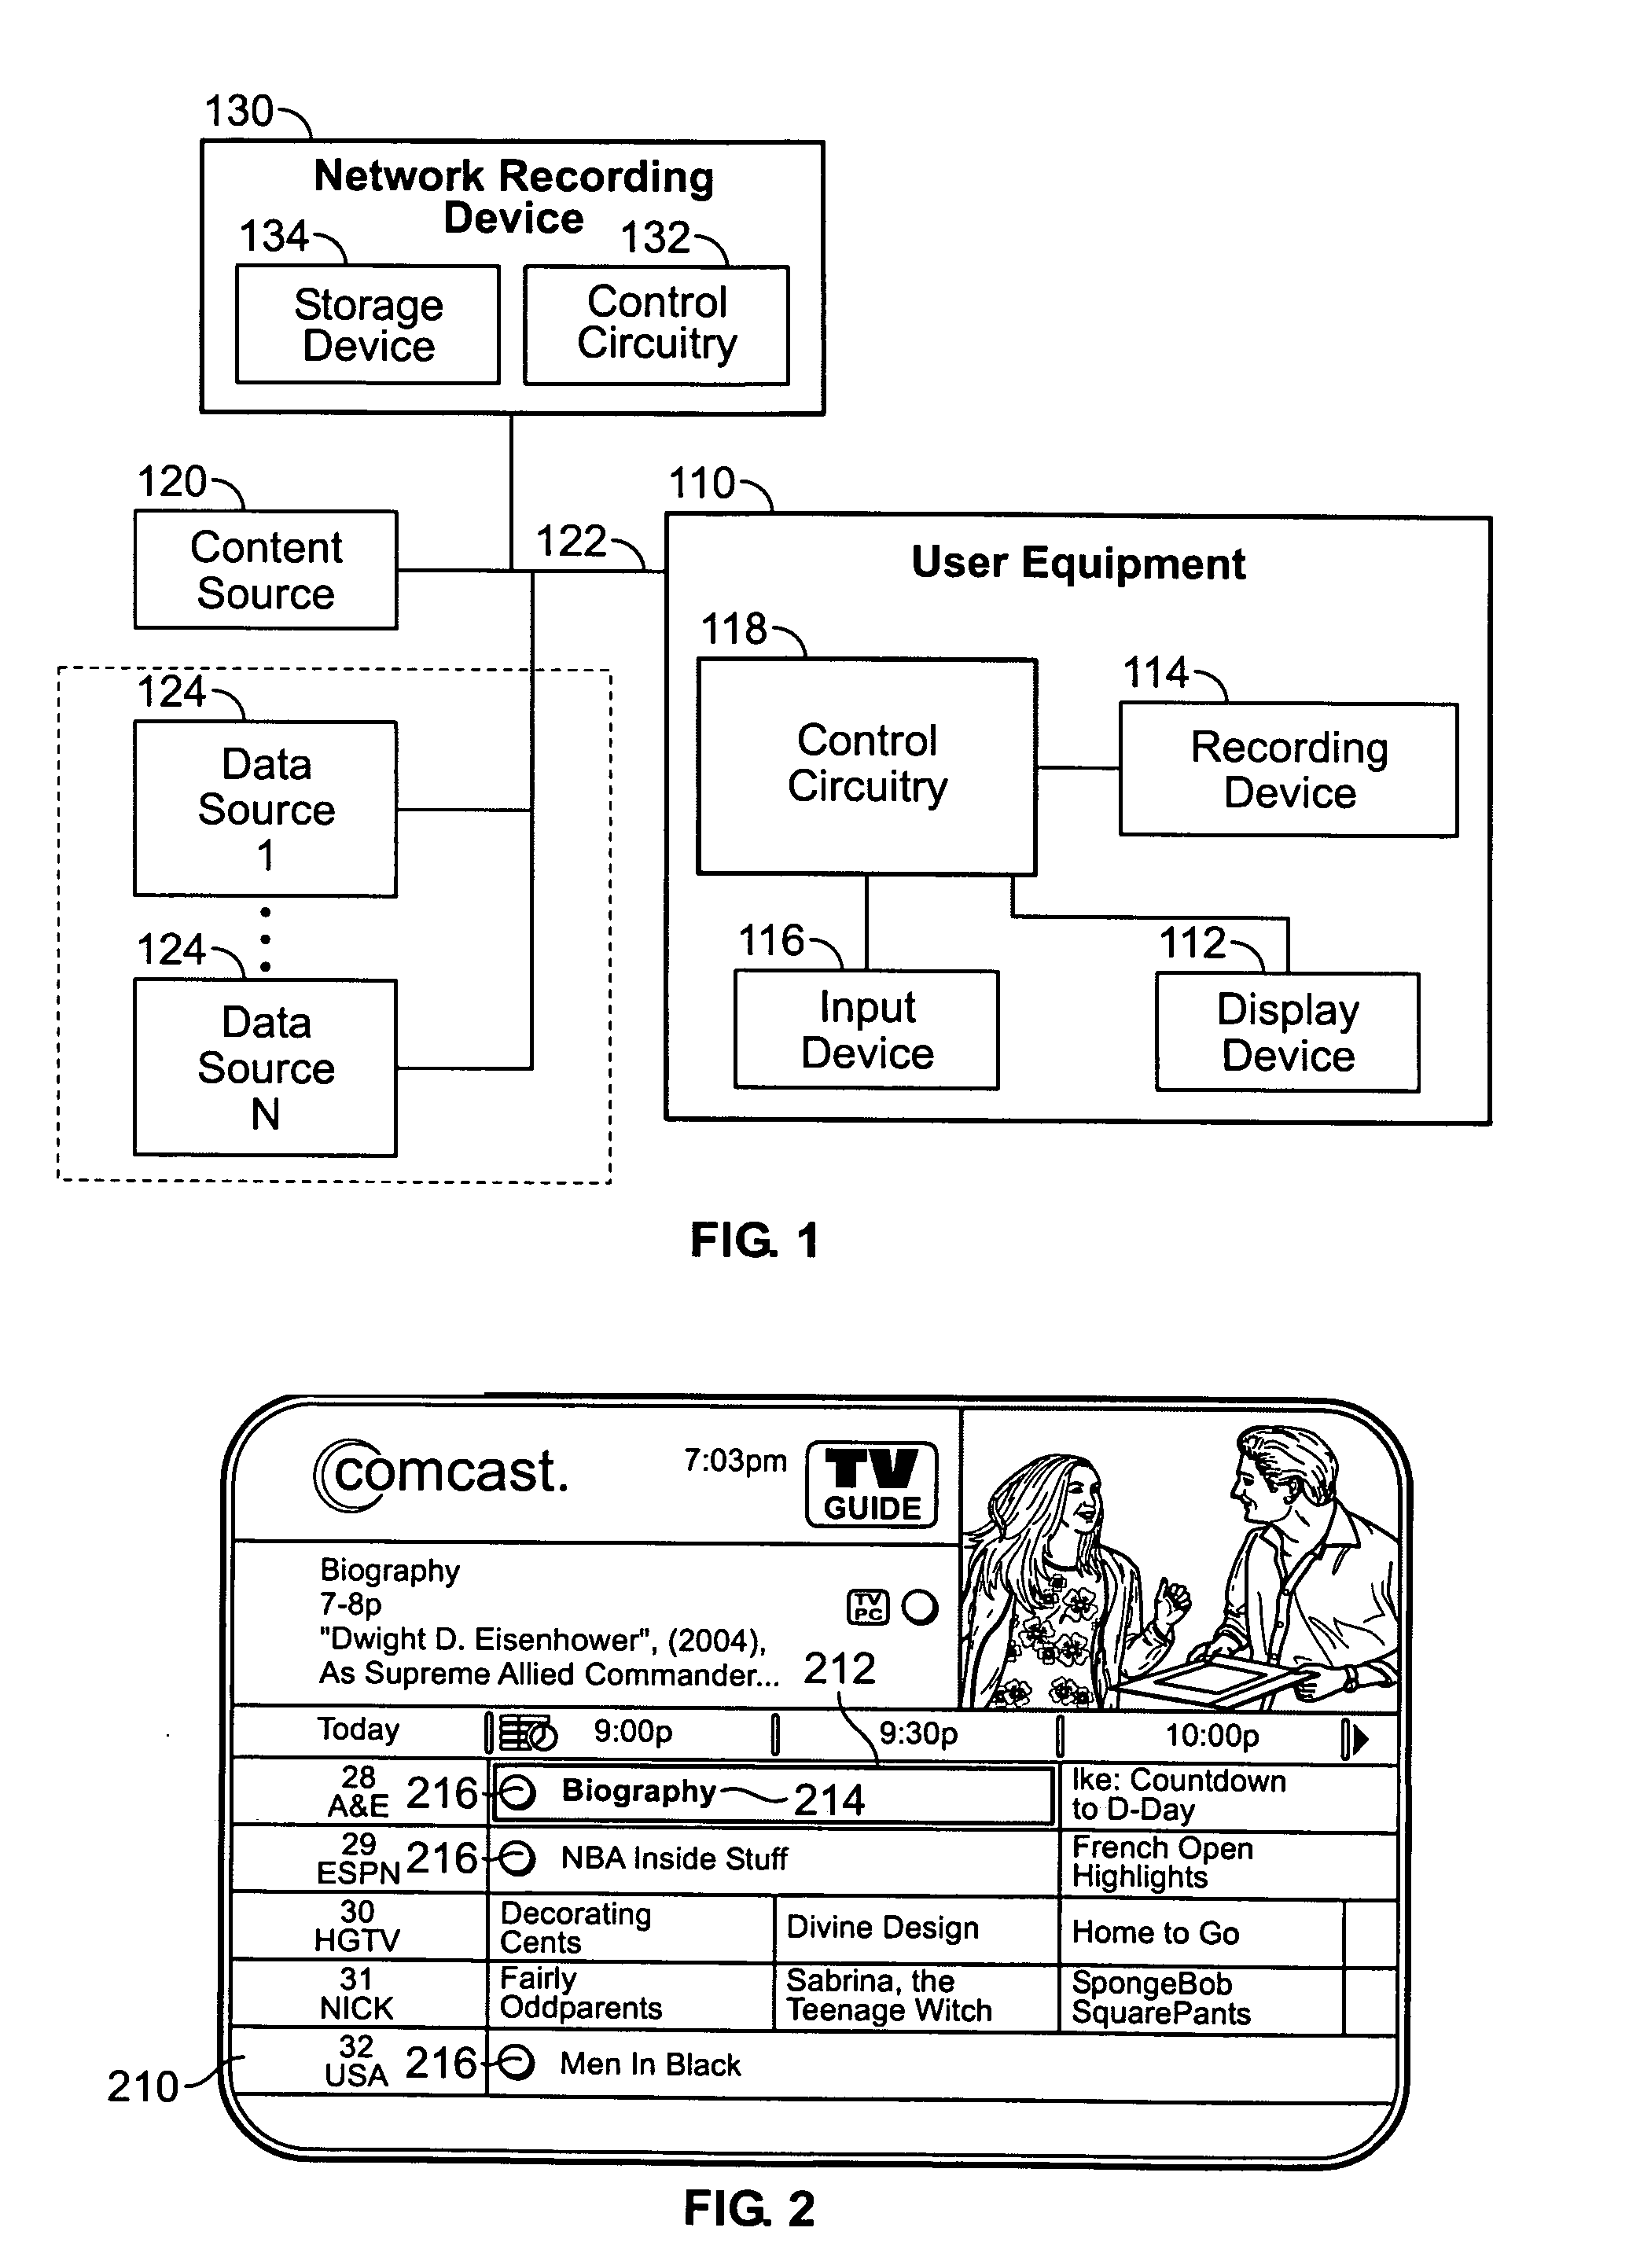 Systems and methods for recording programs using a network recording device as supplemental storage